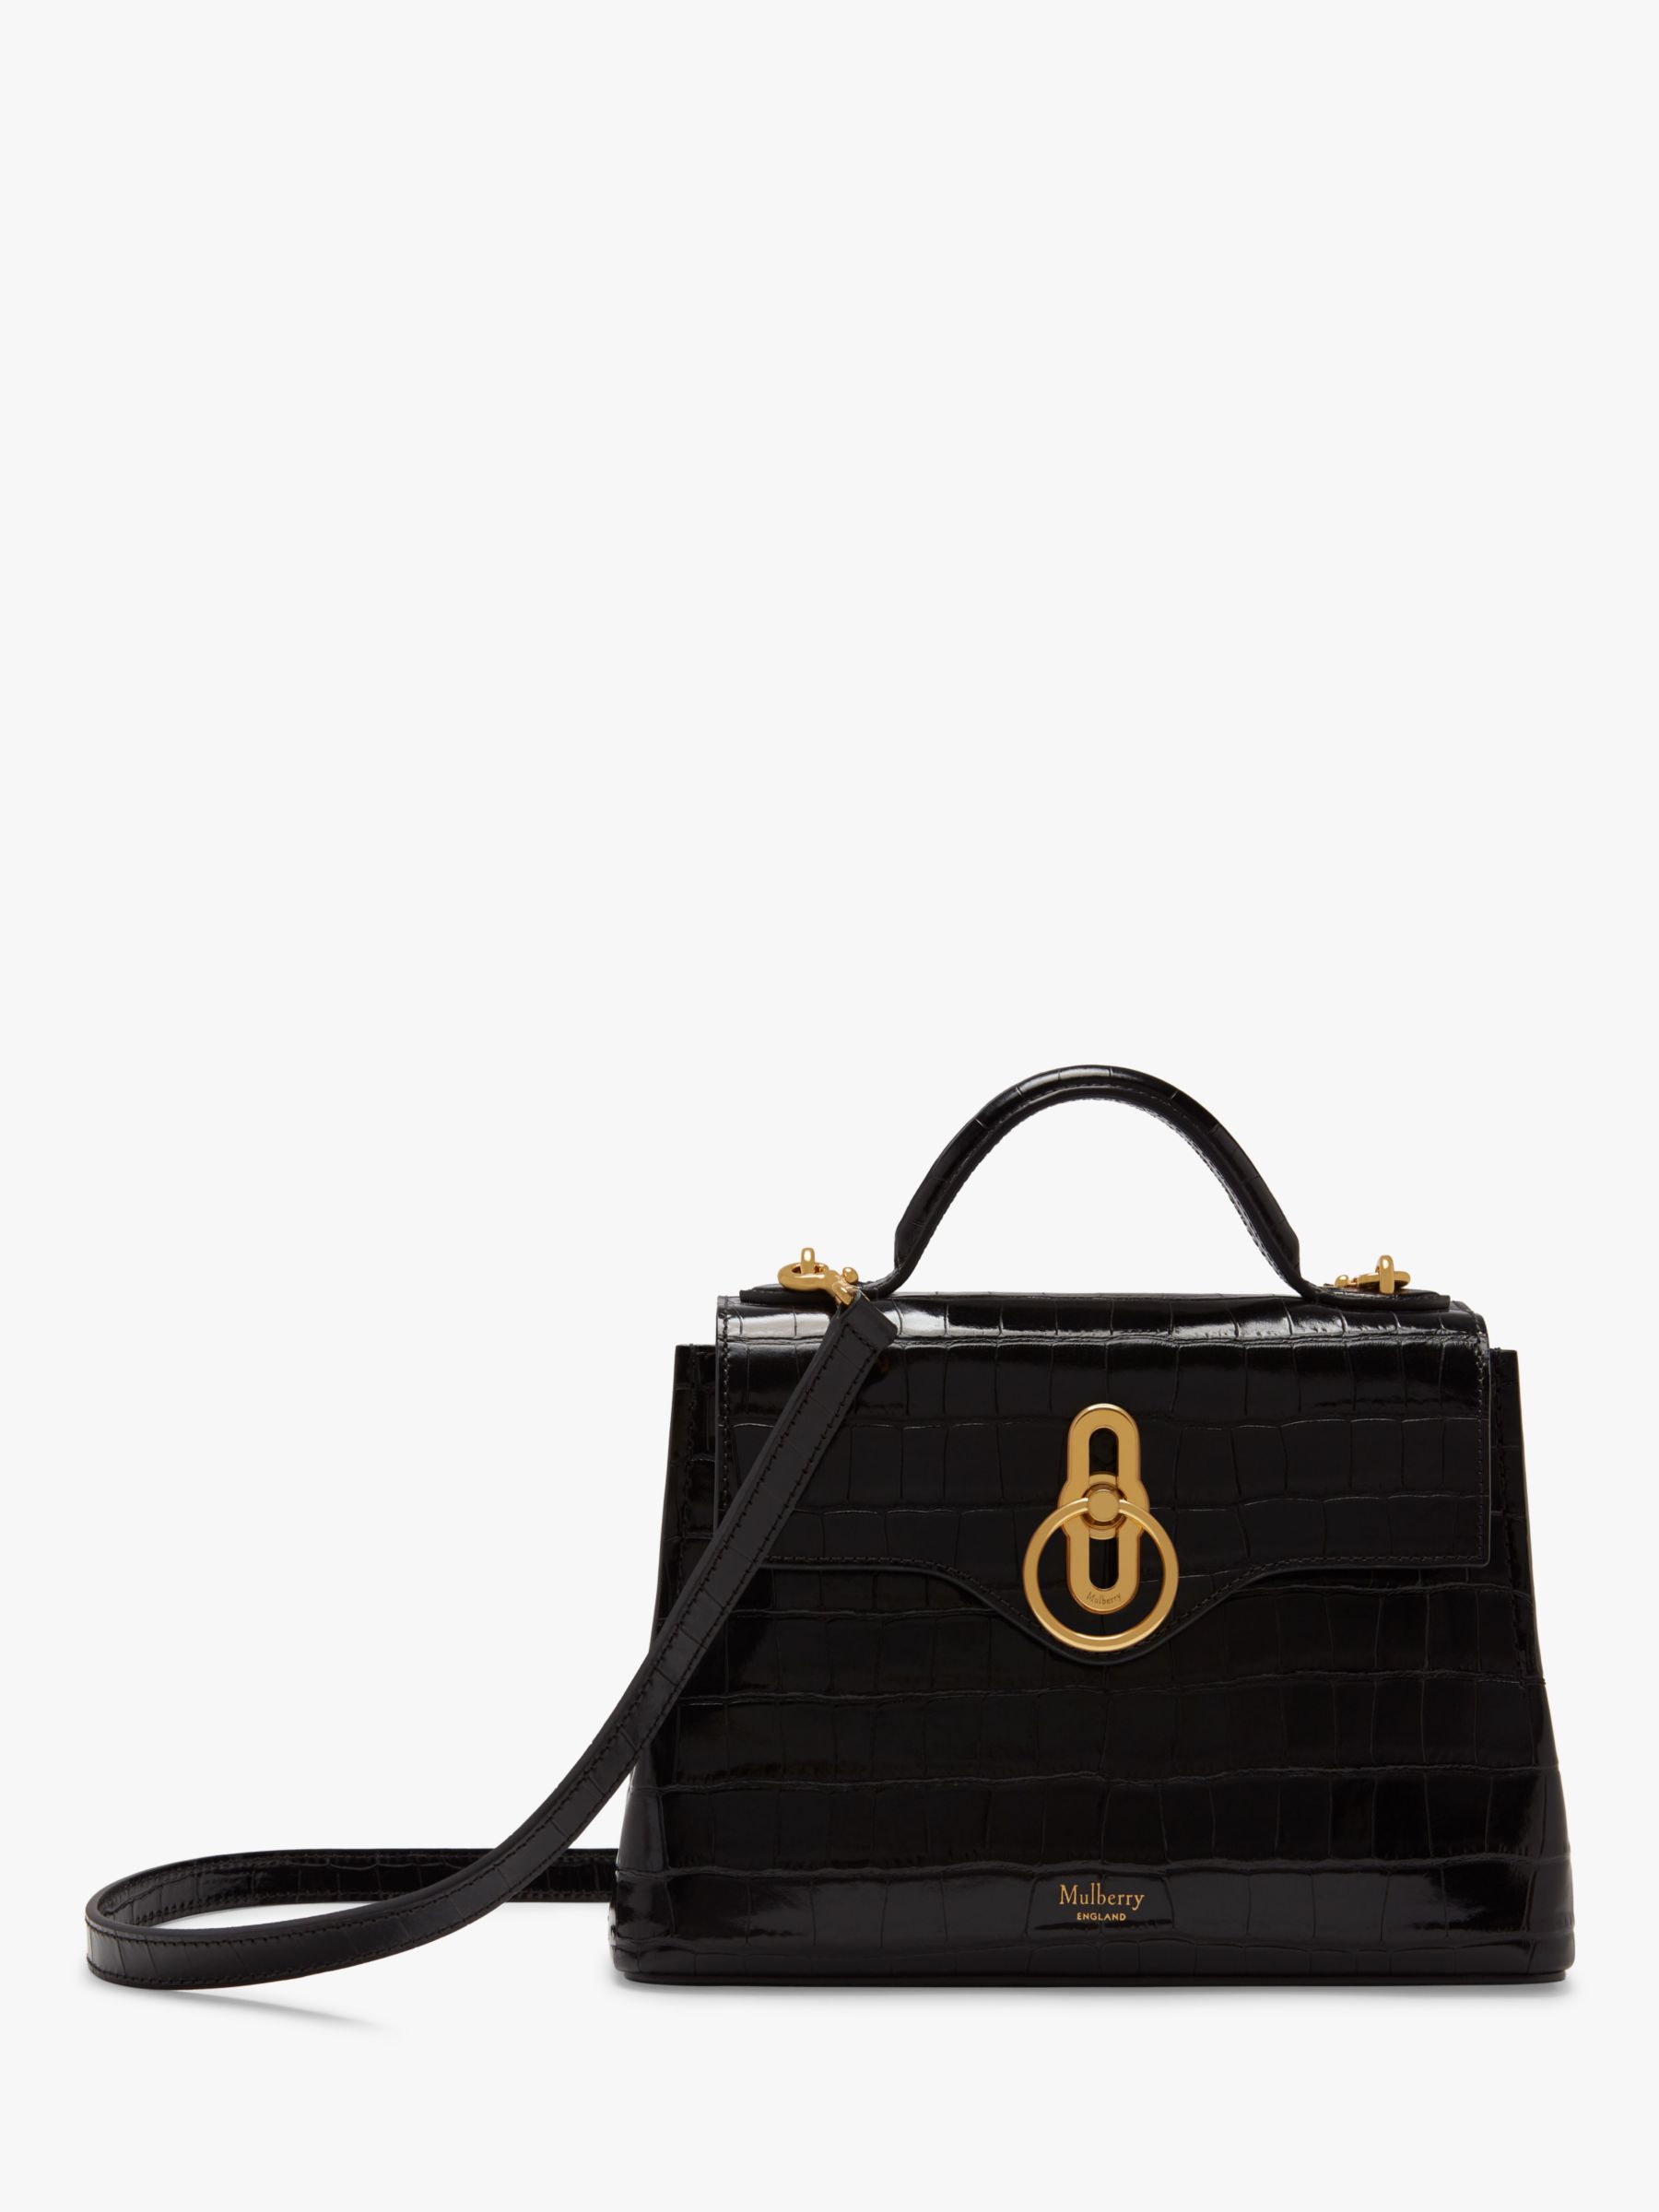 Mulberry Mini Seaton Croc Embossed Leather Chinoiserie Shoulder Bag at John Lewis & Partners